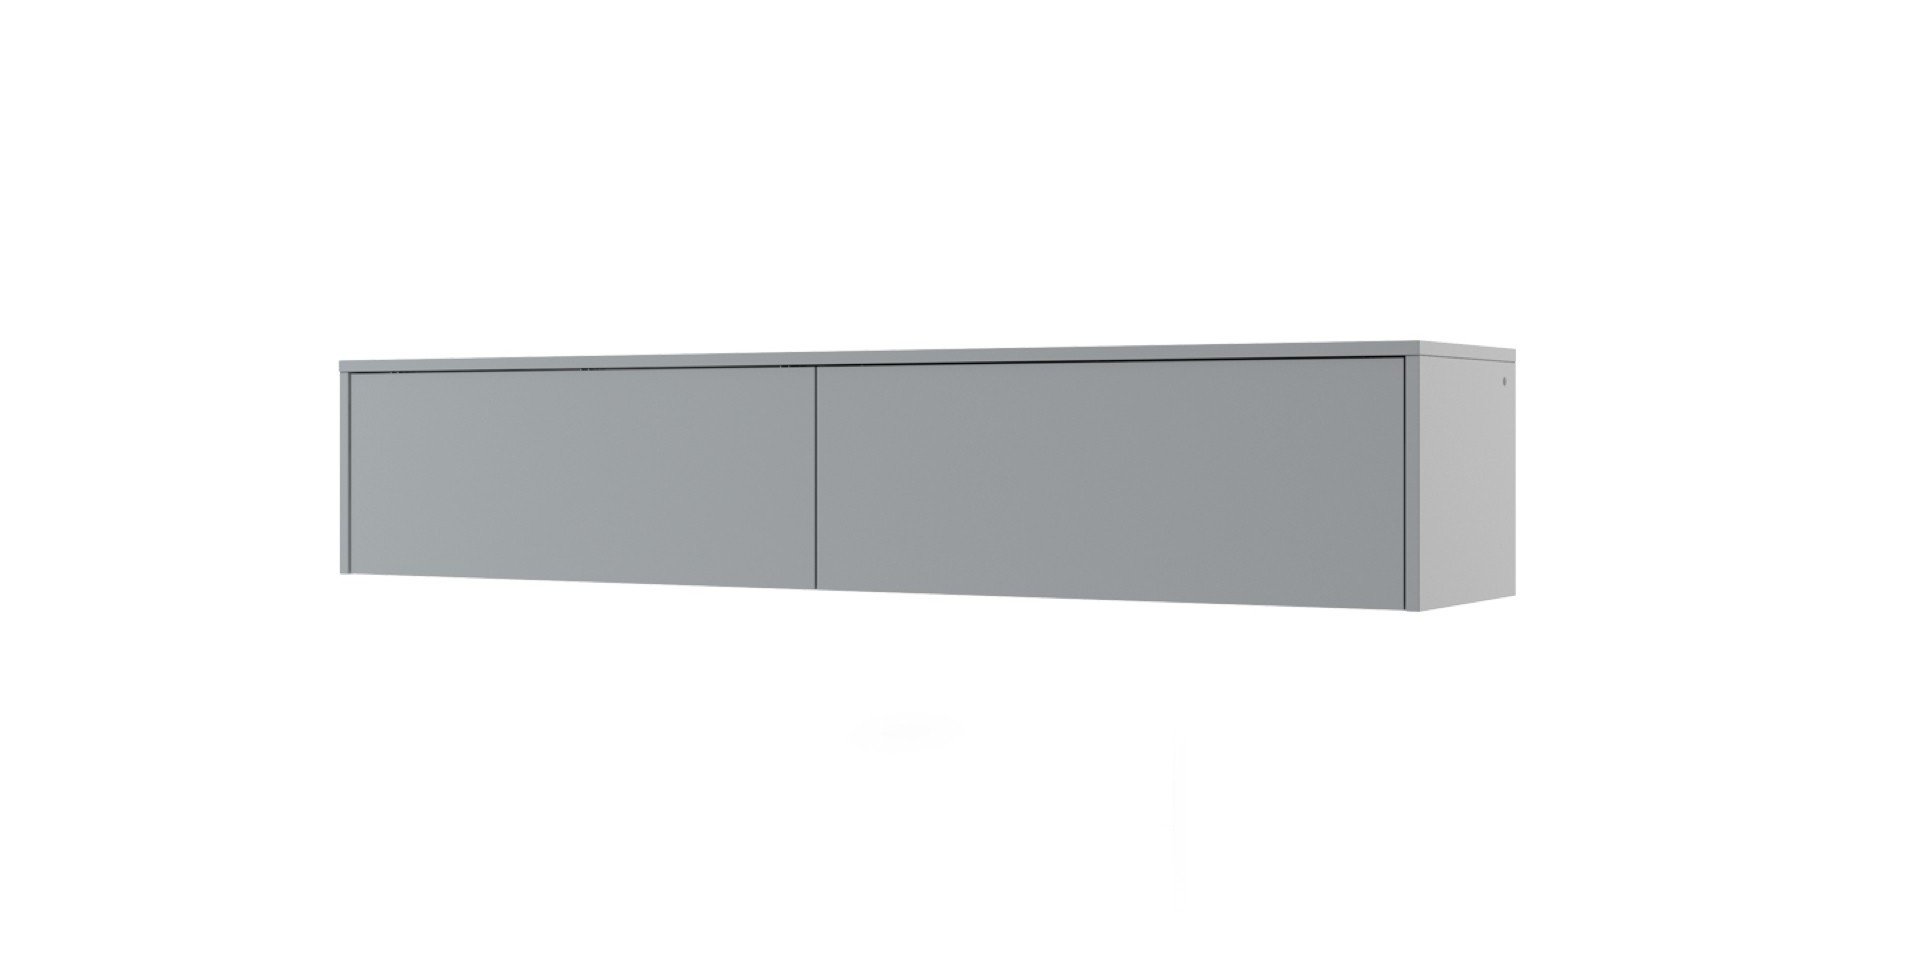 View BC15 Over Bed Unit for Horizontal Wall Bed Concept 160cm Grey Matt 211cm information